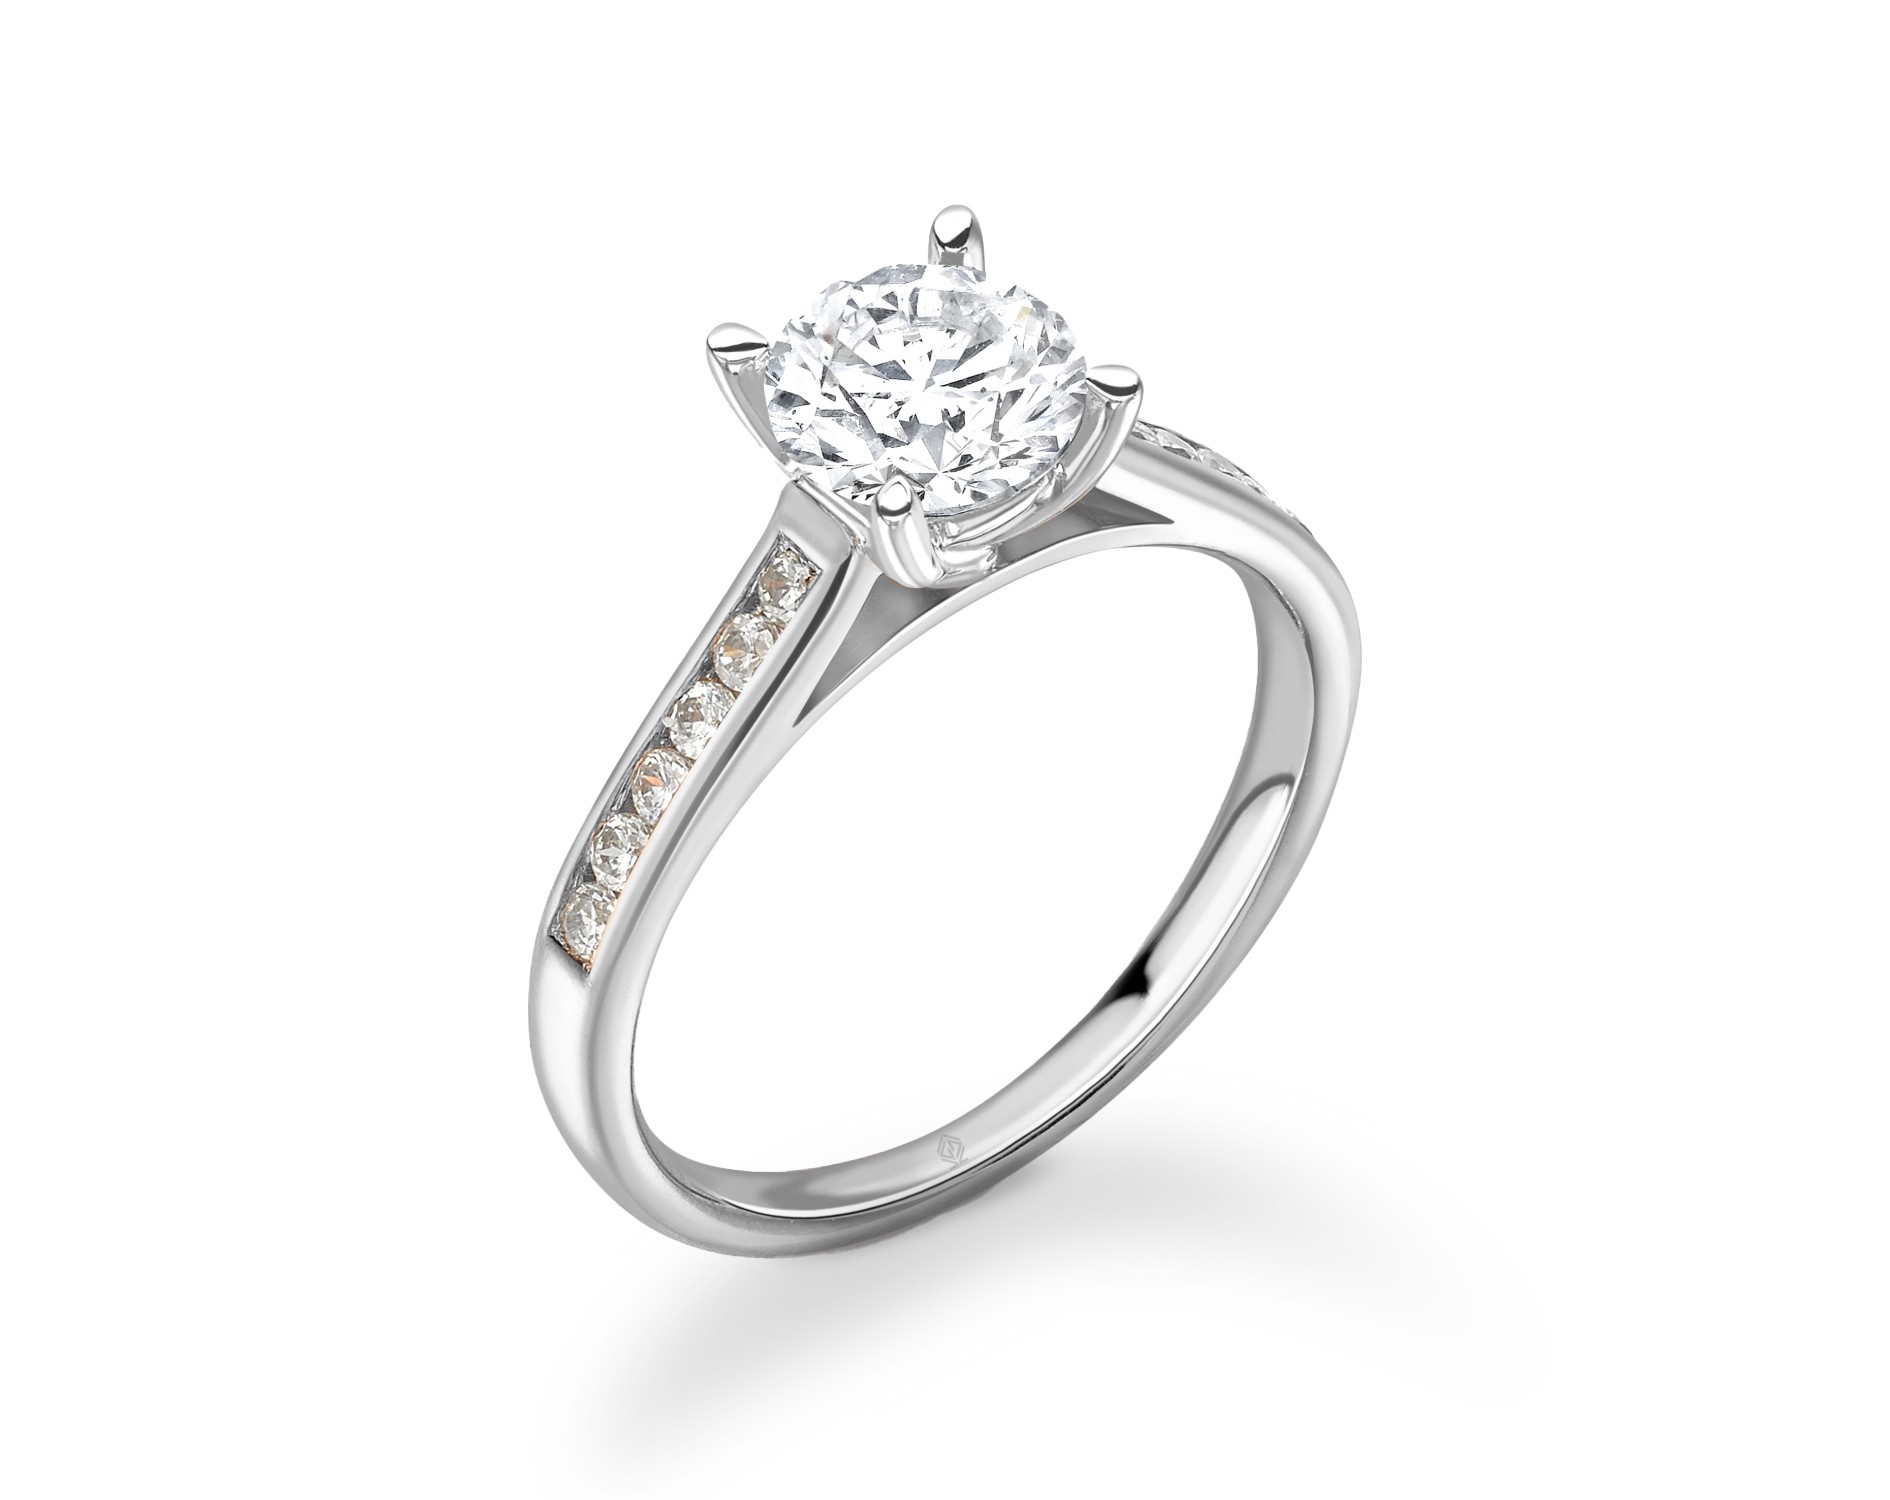 18K WHITE GOLD 4 PRONGS HEAD DIAMOND ENGAGEMENT RING WITH SIDE STONES CHANNEL SET